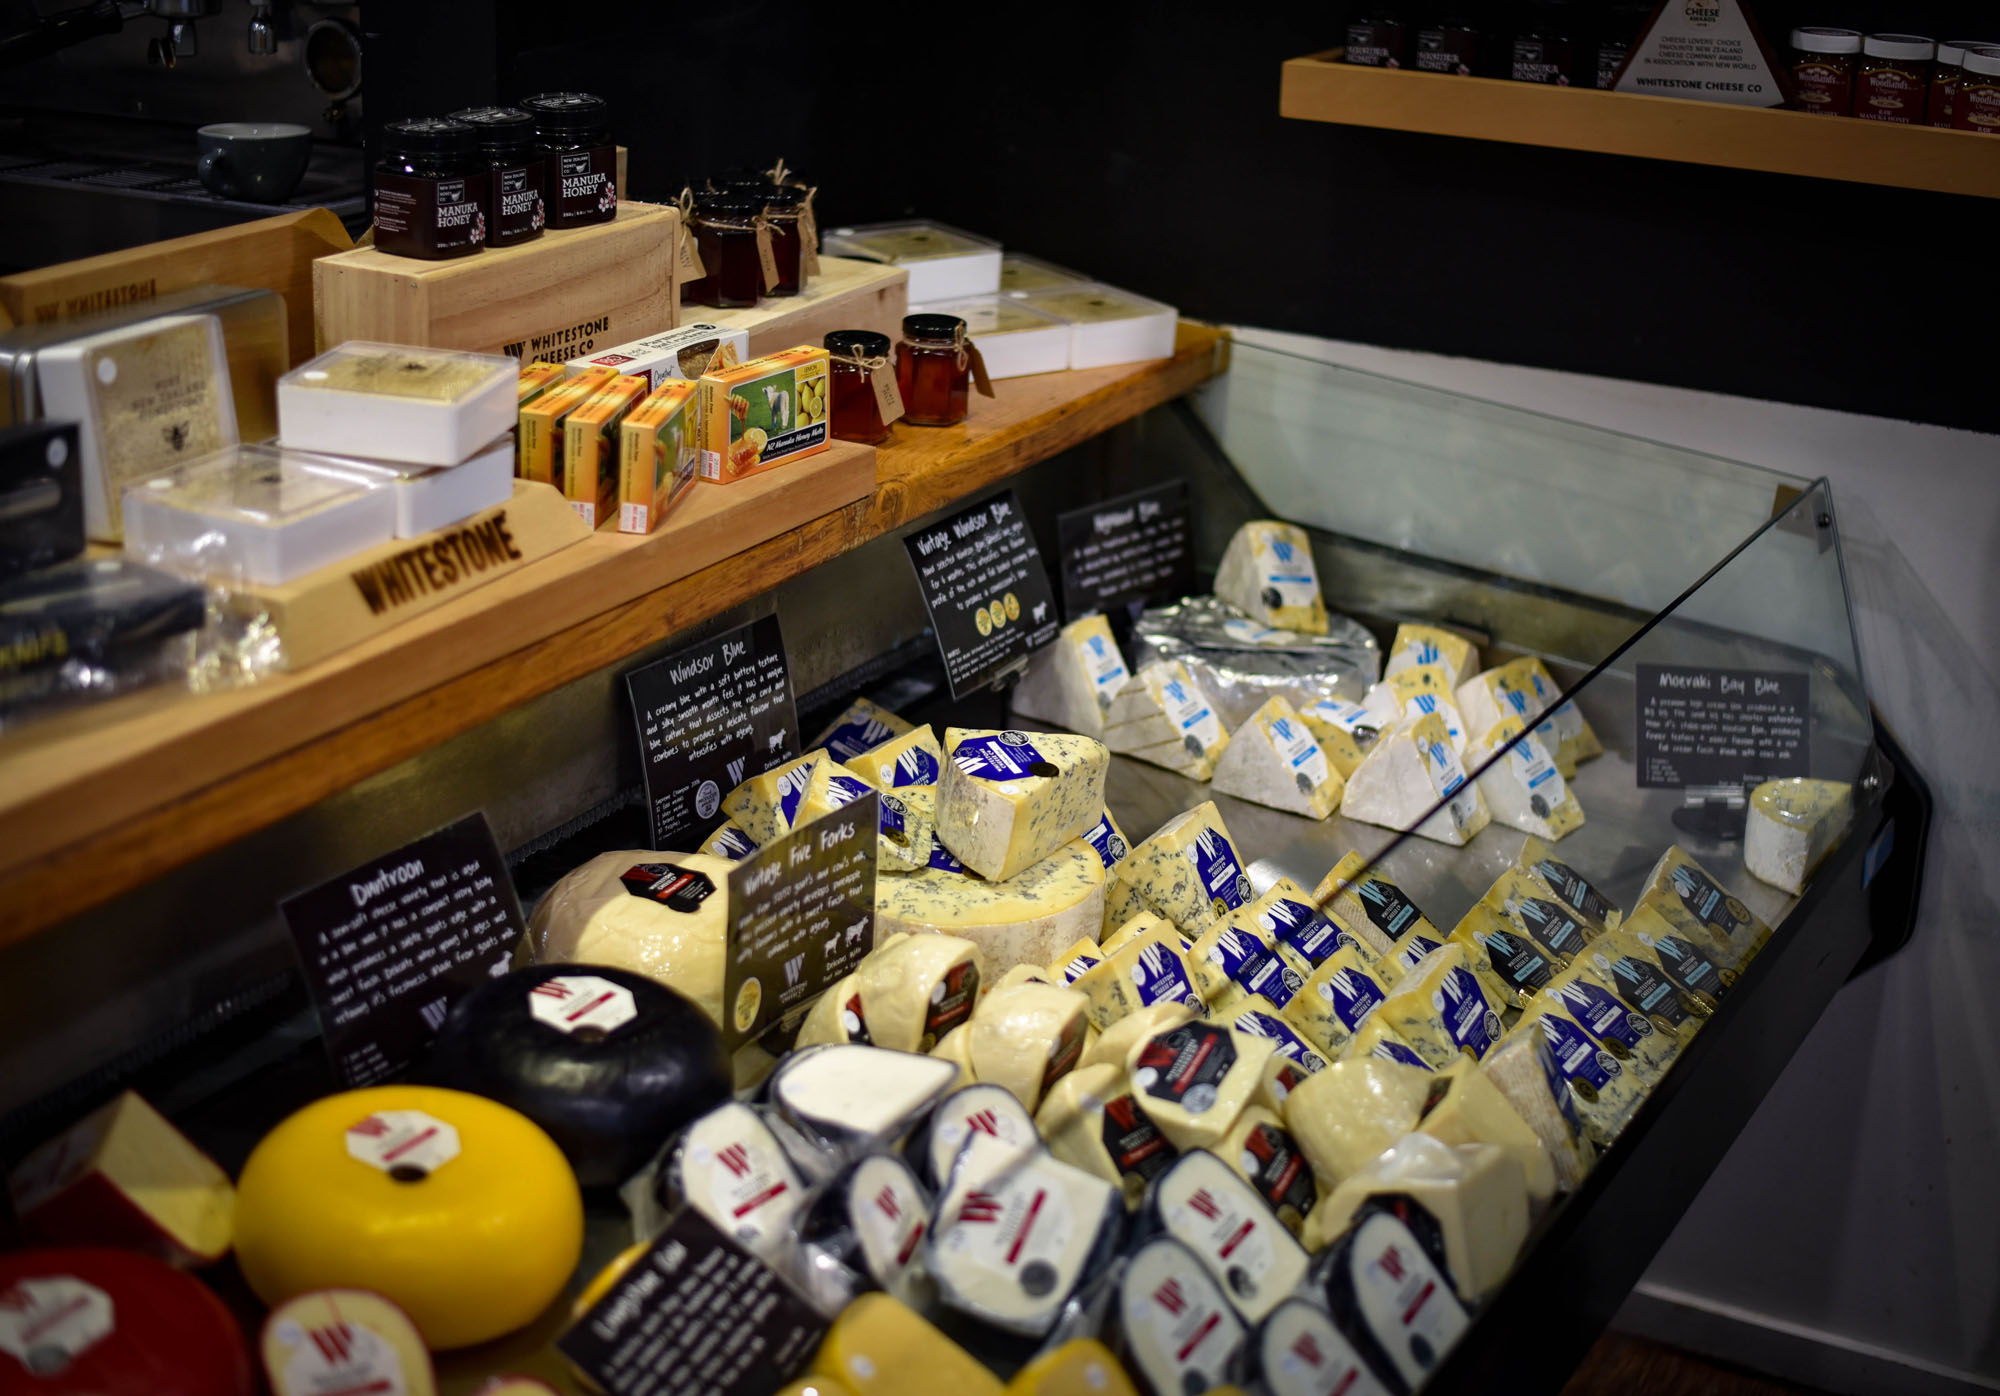 Taste the unique flavours crafted by one of NZ’s leading artisan cheesemakers at the Whitestone Cheese shop and cafe.